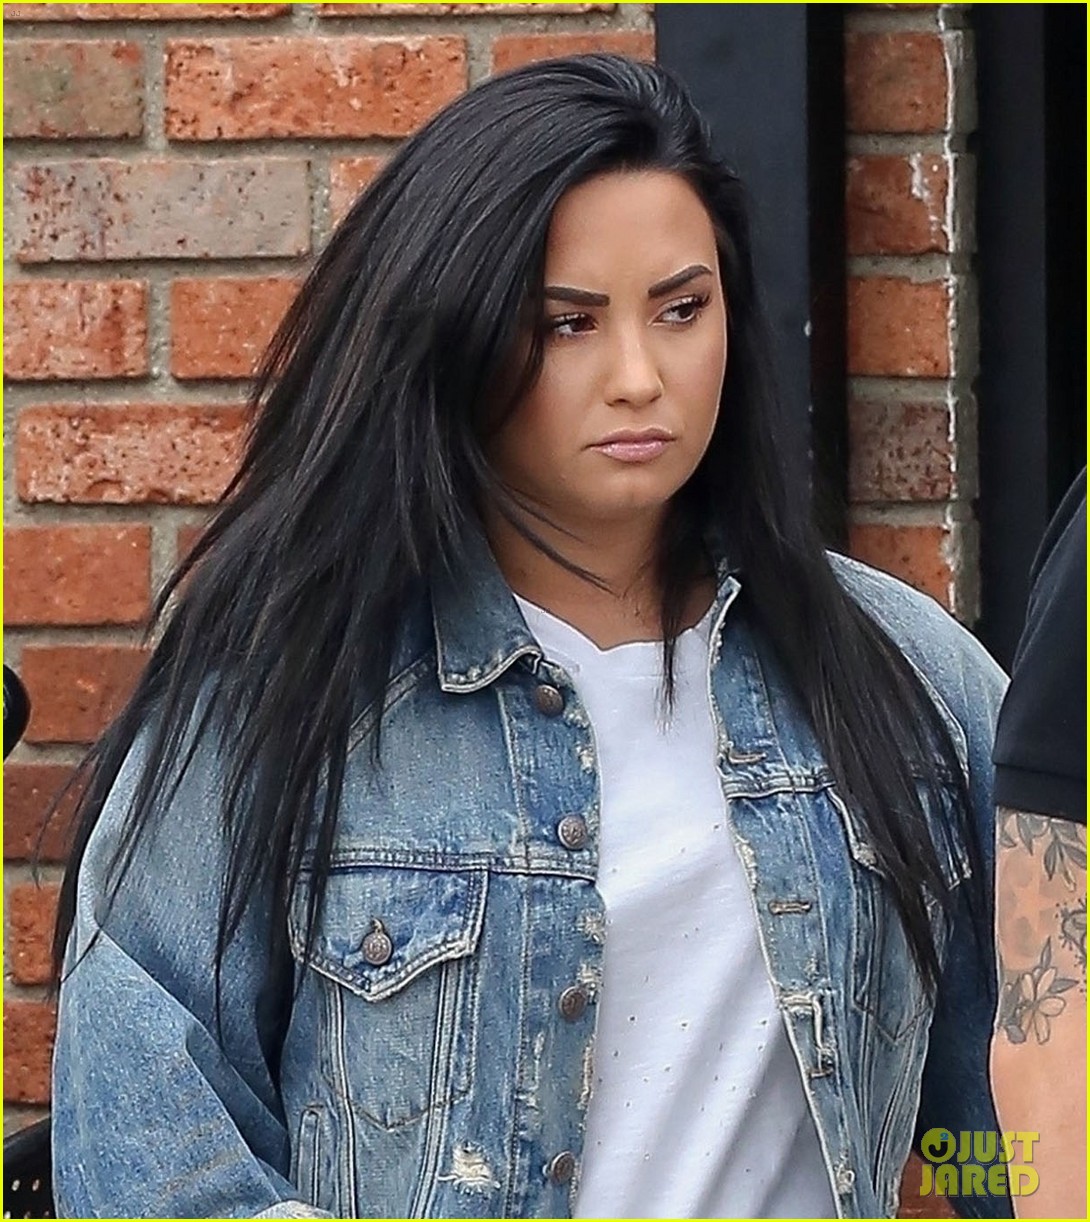 demi lovato makes a coffee run after a workout in la 04